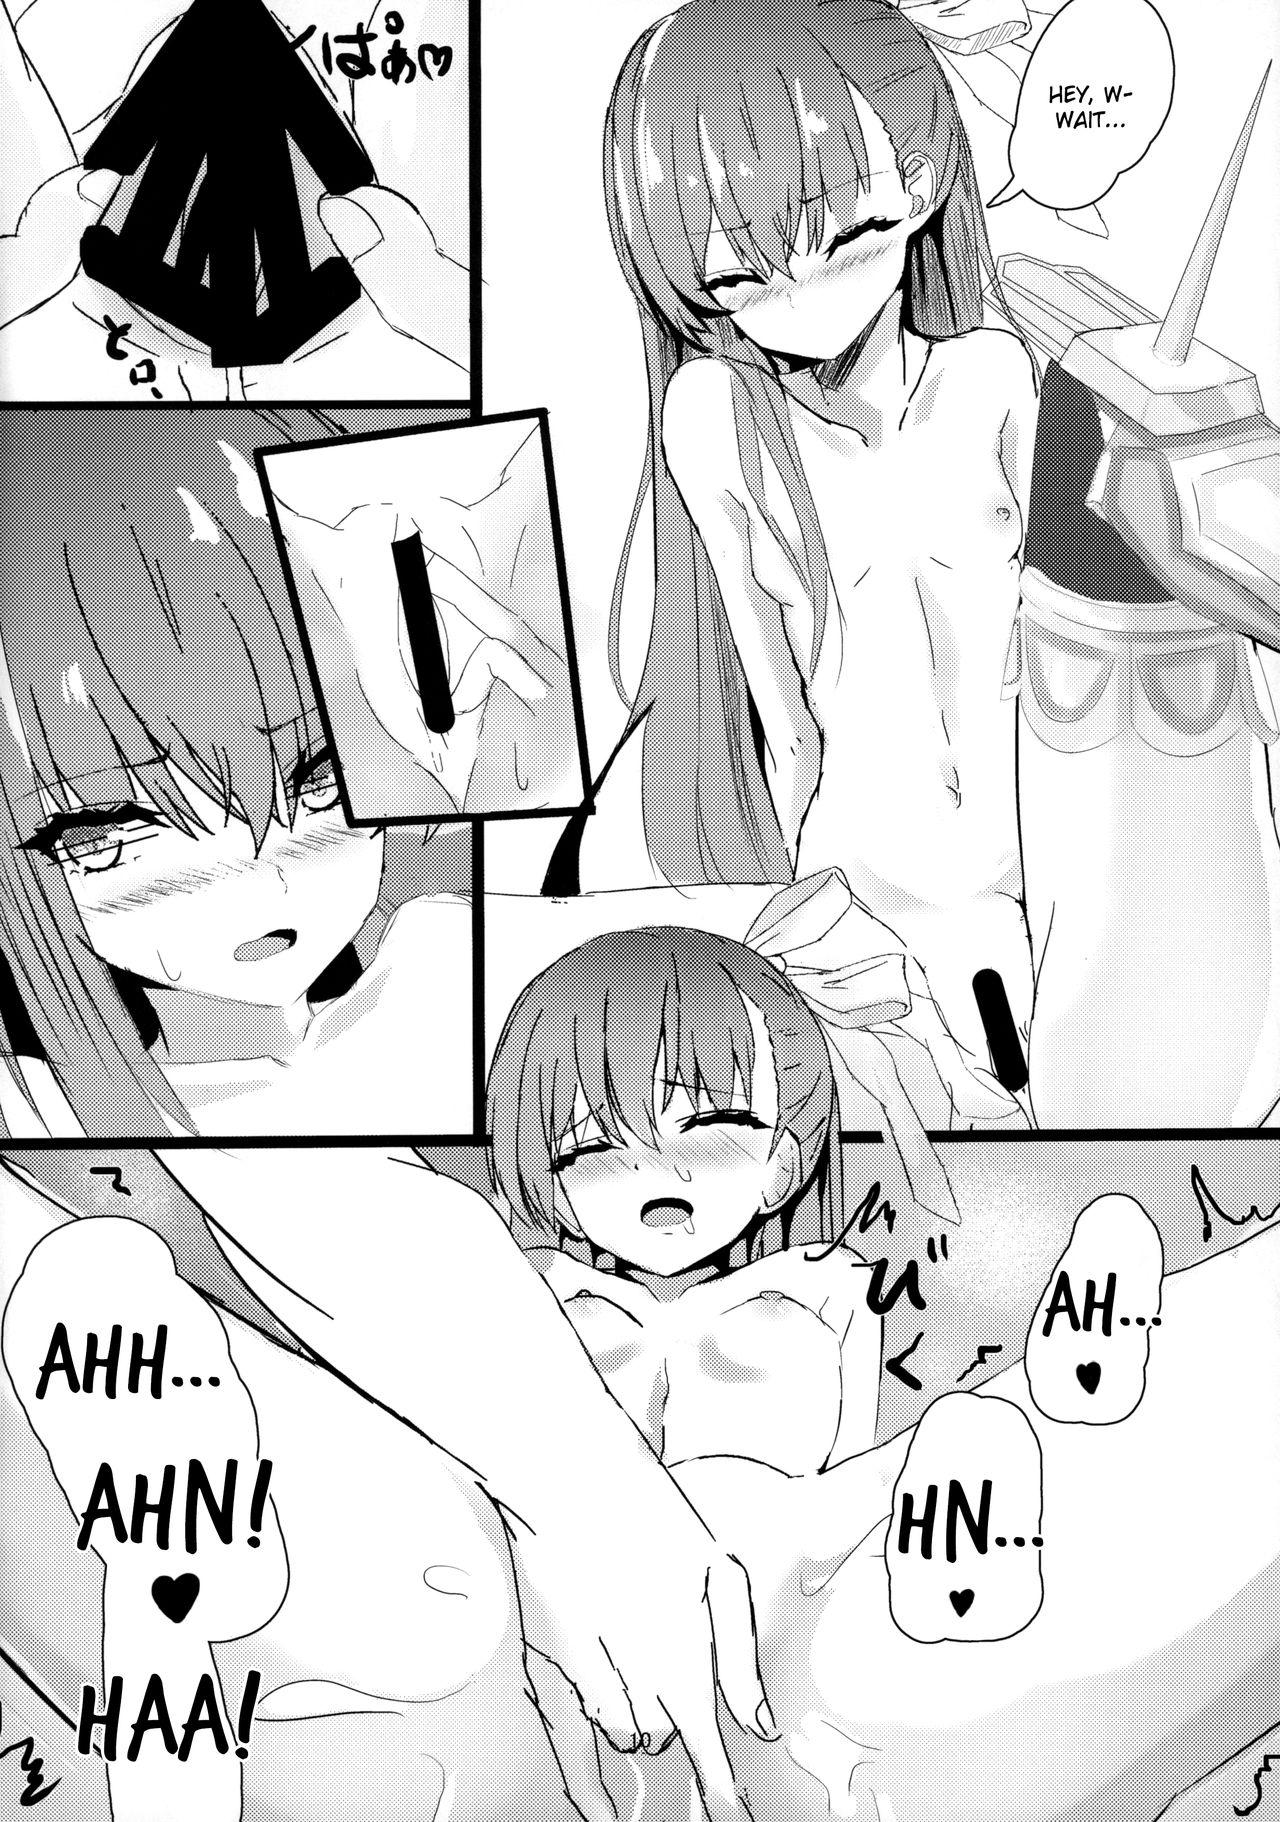 Hot Blow Jobs Melt down - Fate grand order Free Blow Job - Page 9